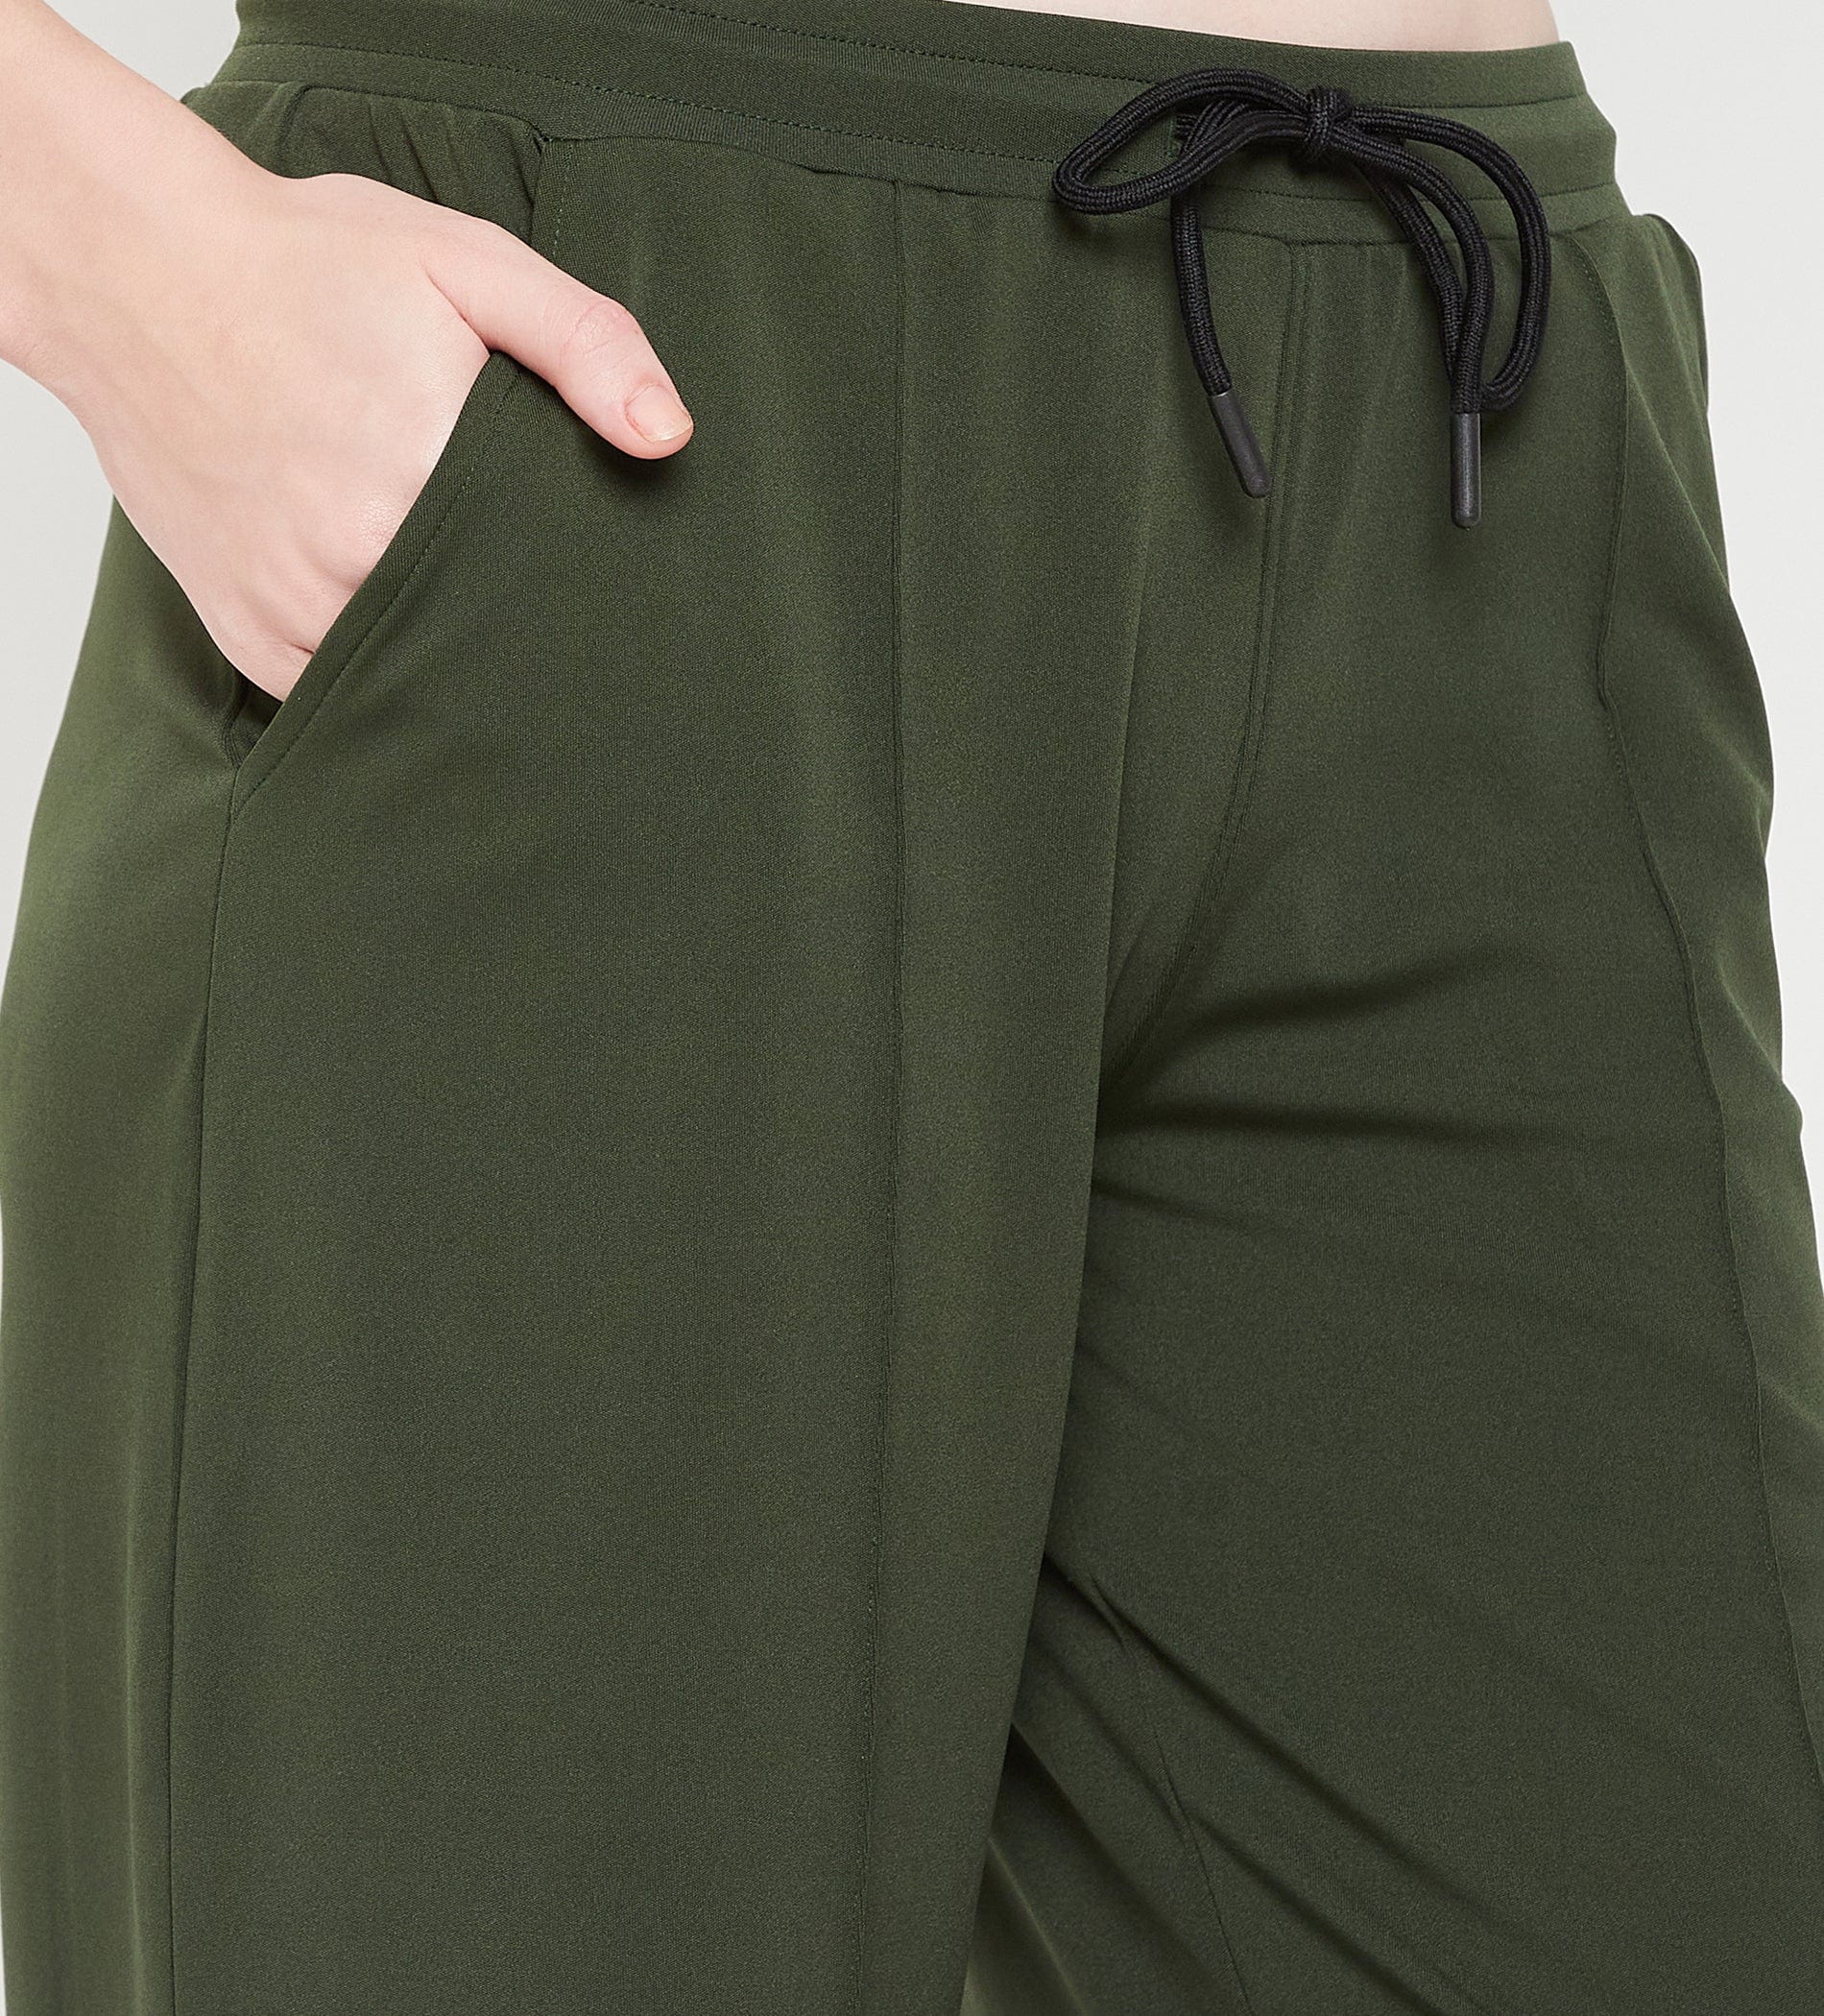 Track Pants Open Bottom Trackpant Olive Pin Tuck Pants for Women